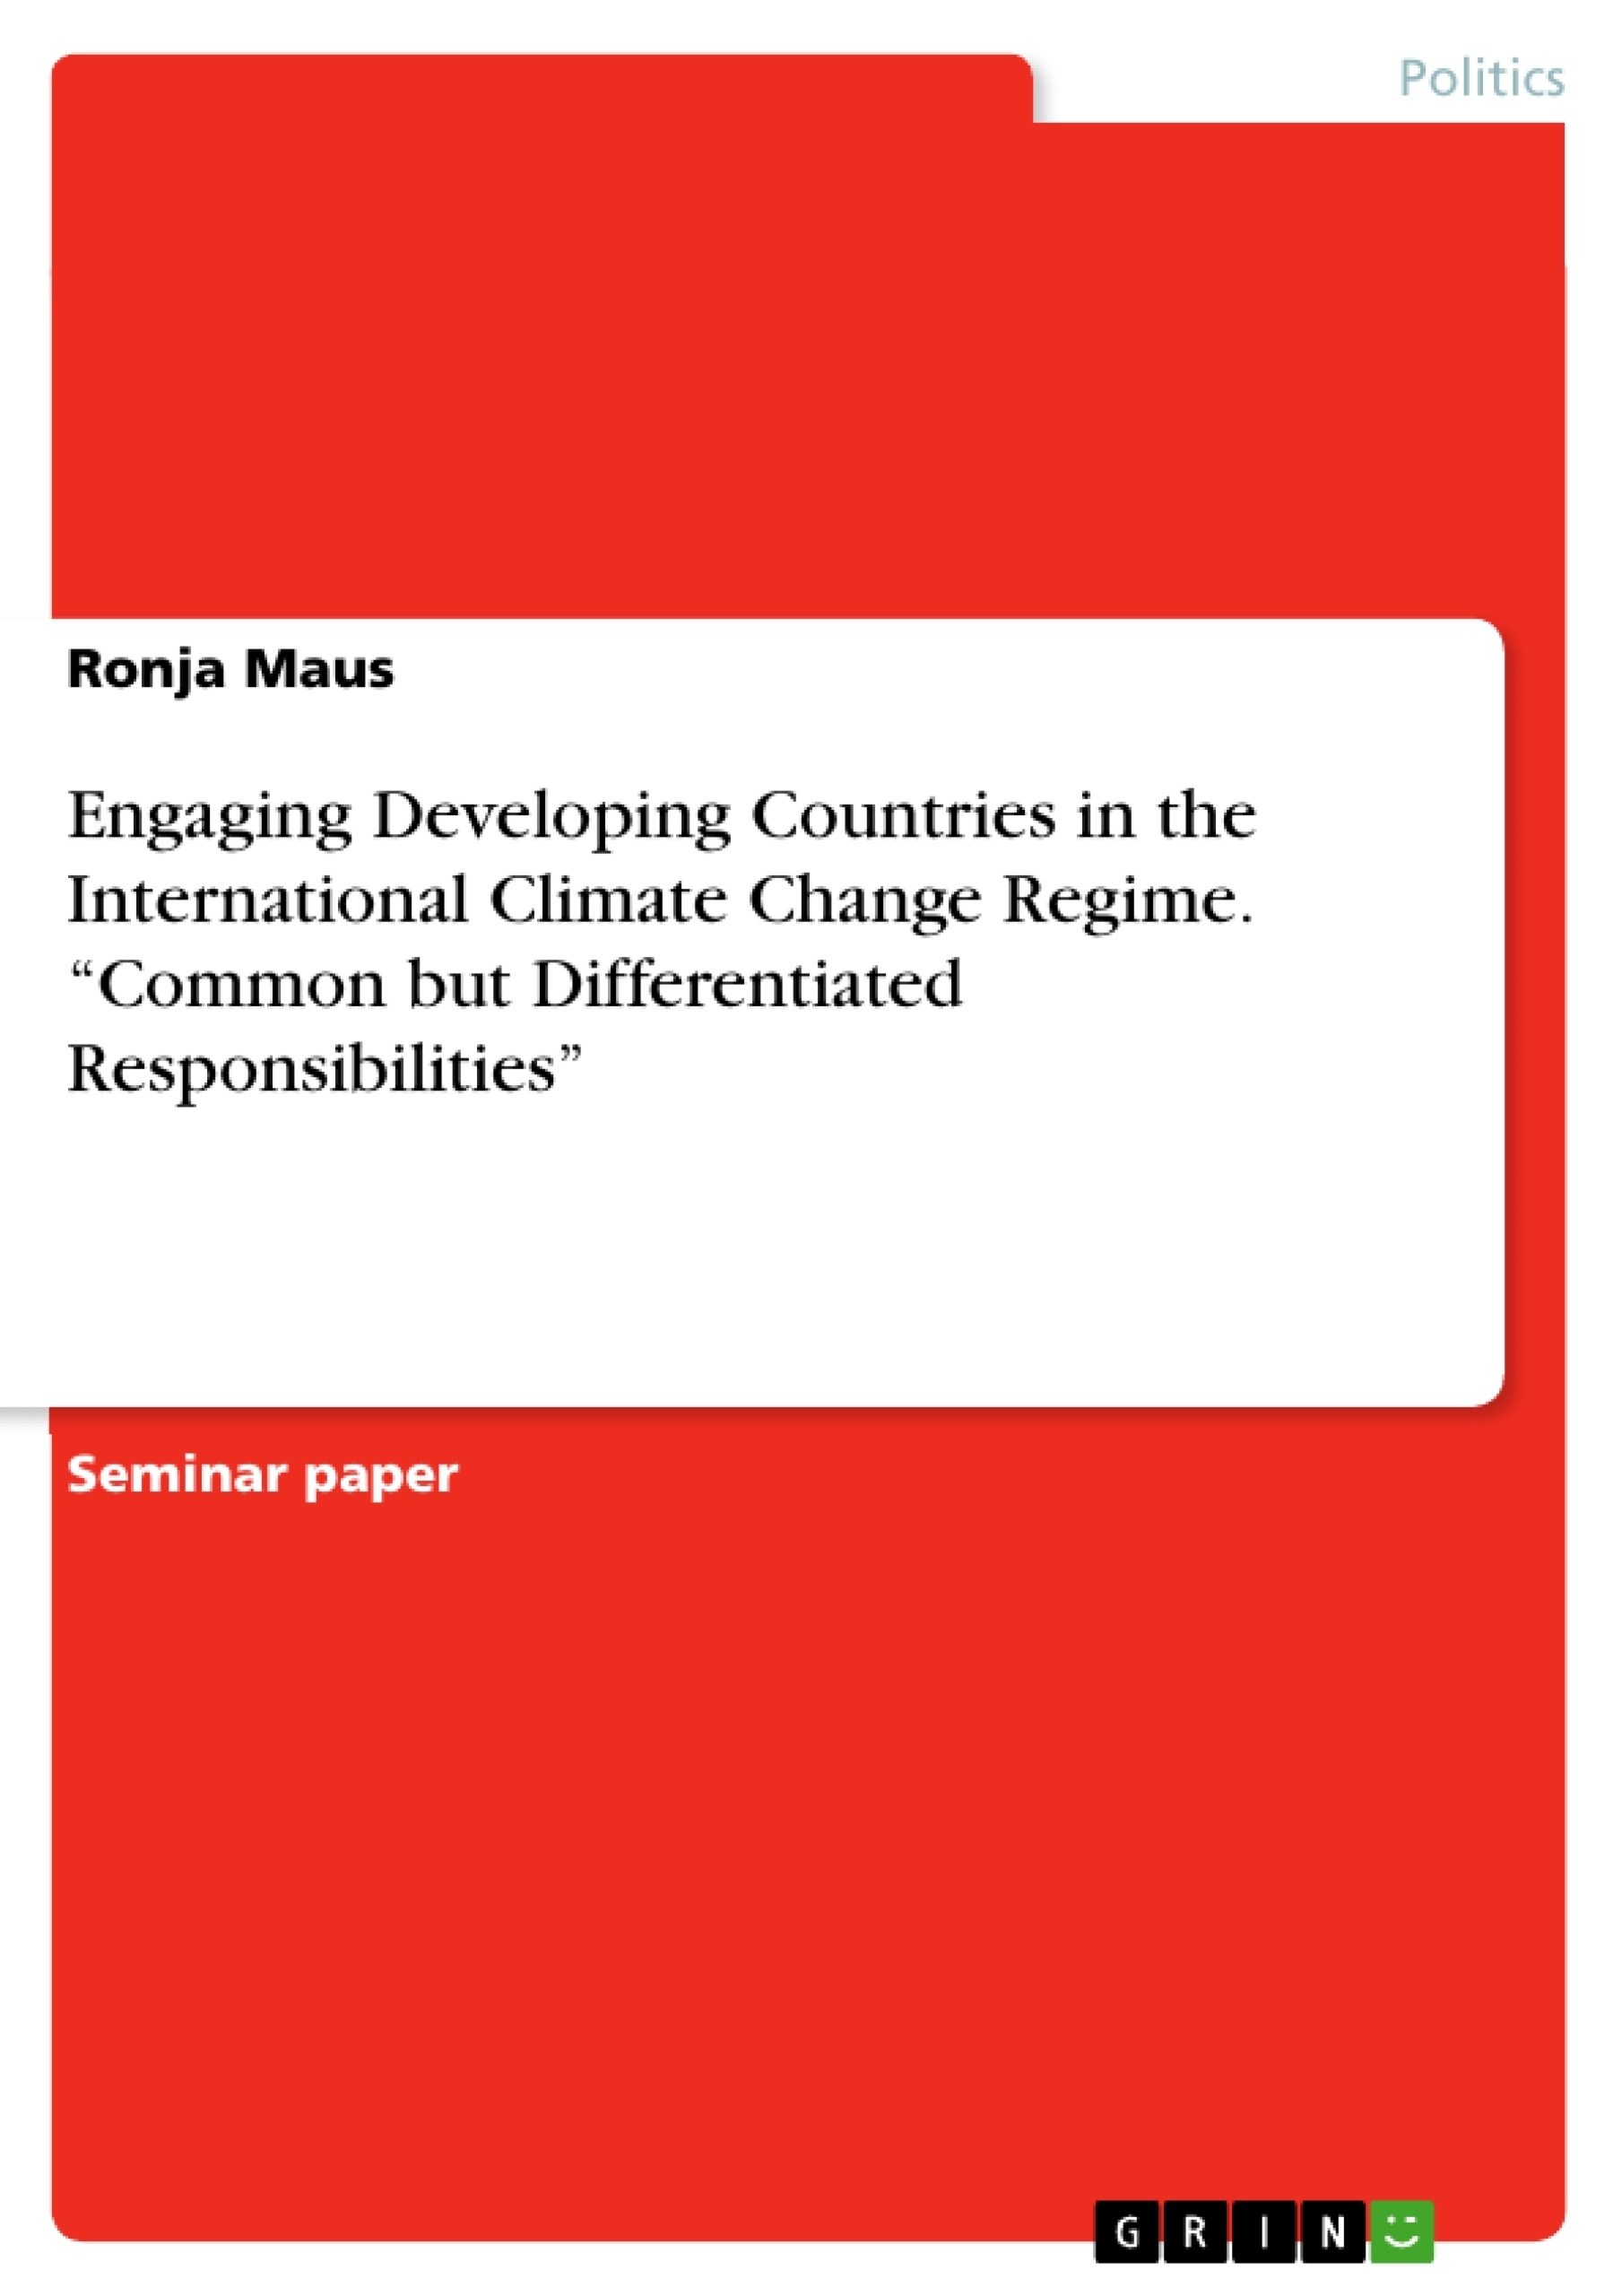 Title: Engaging Developing Countries in the International Climate Change Regime. “Common but Differentiated Responsibilities”